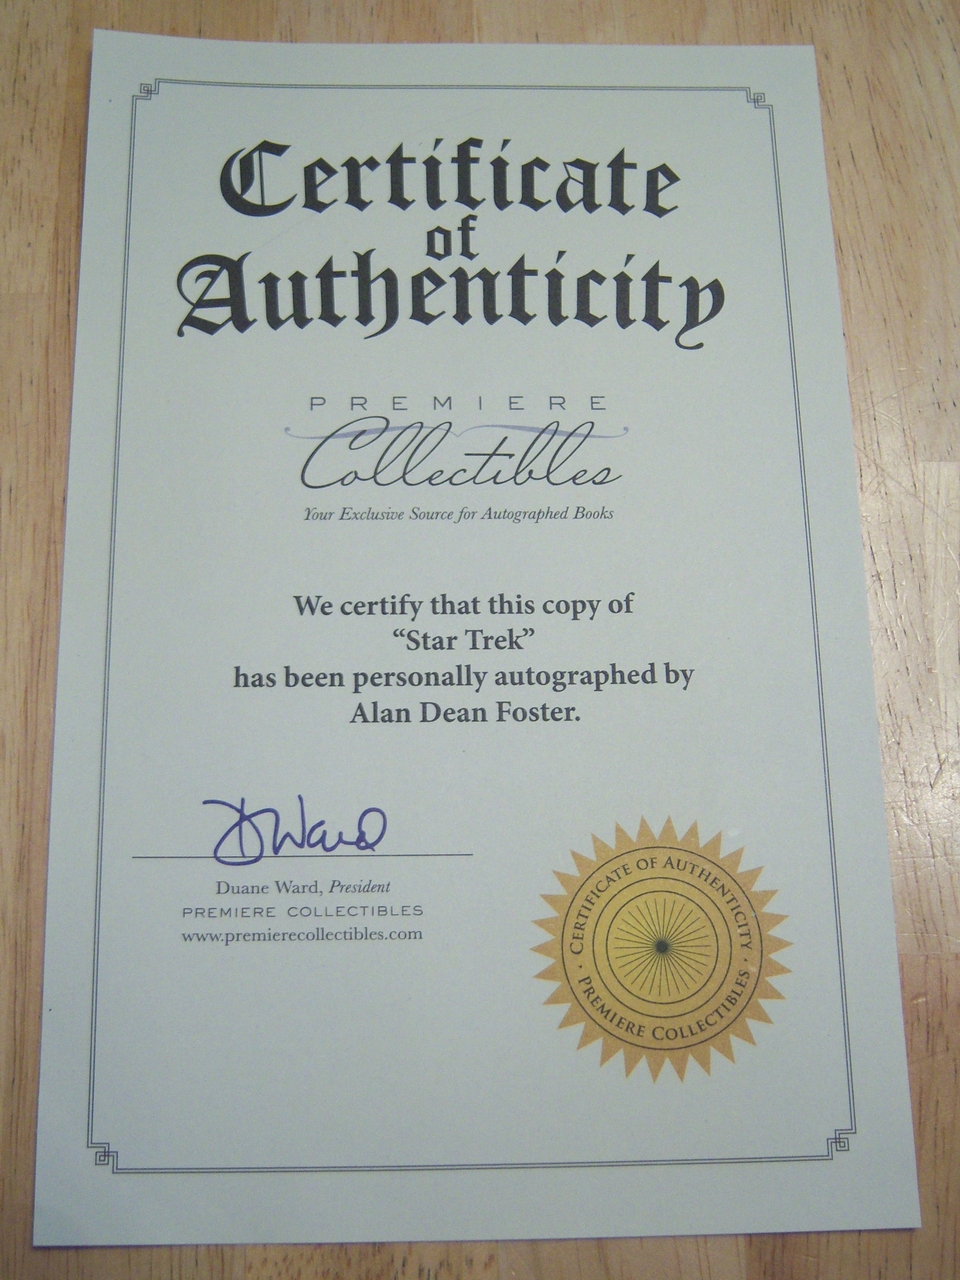 Certificate of Authenticity – how to create your own